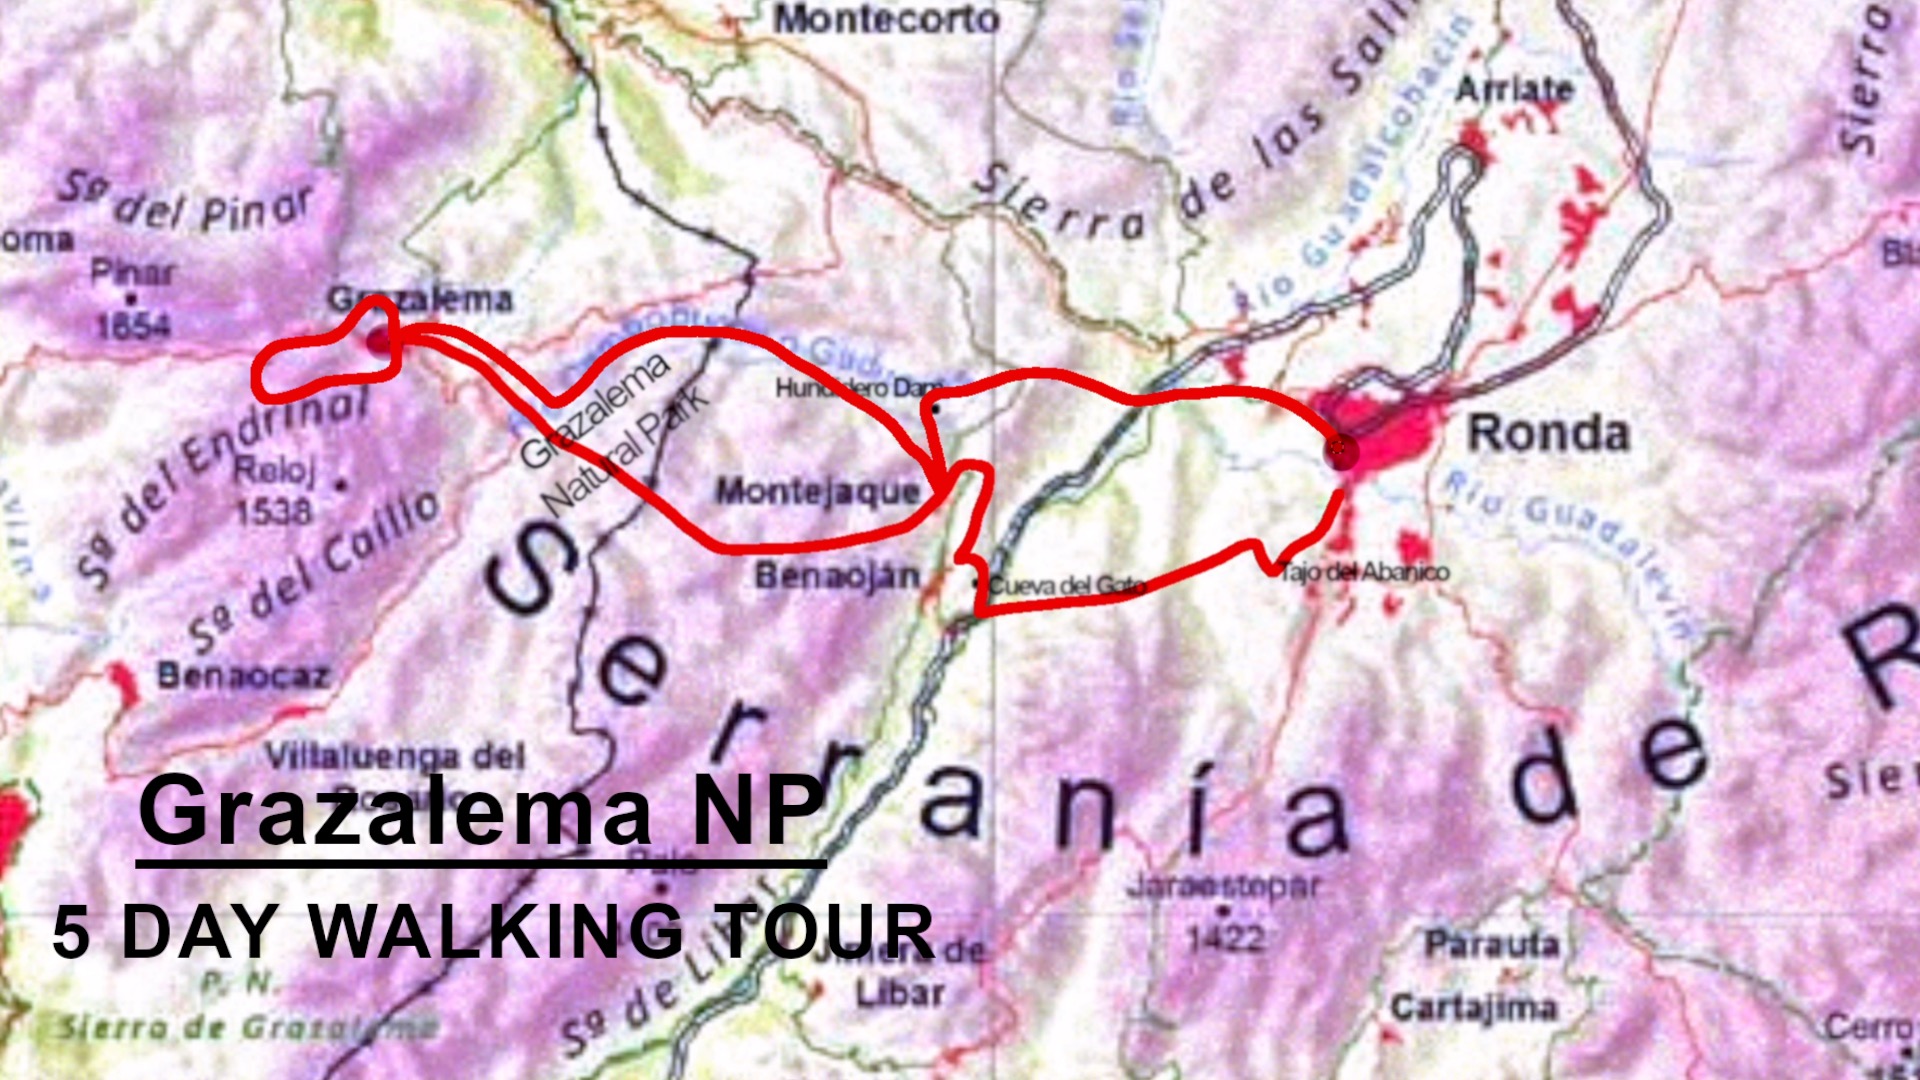 Route map for hiking tour in Andalucia Grazalema Natural Park